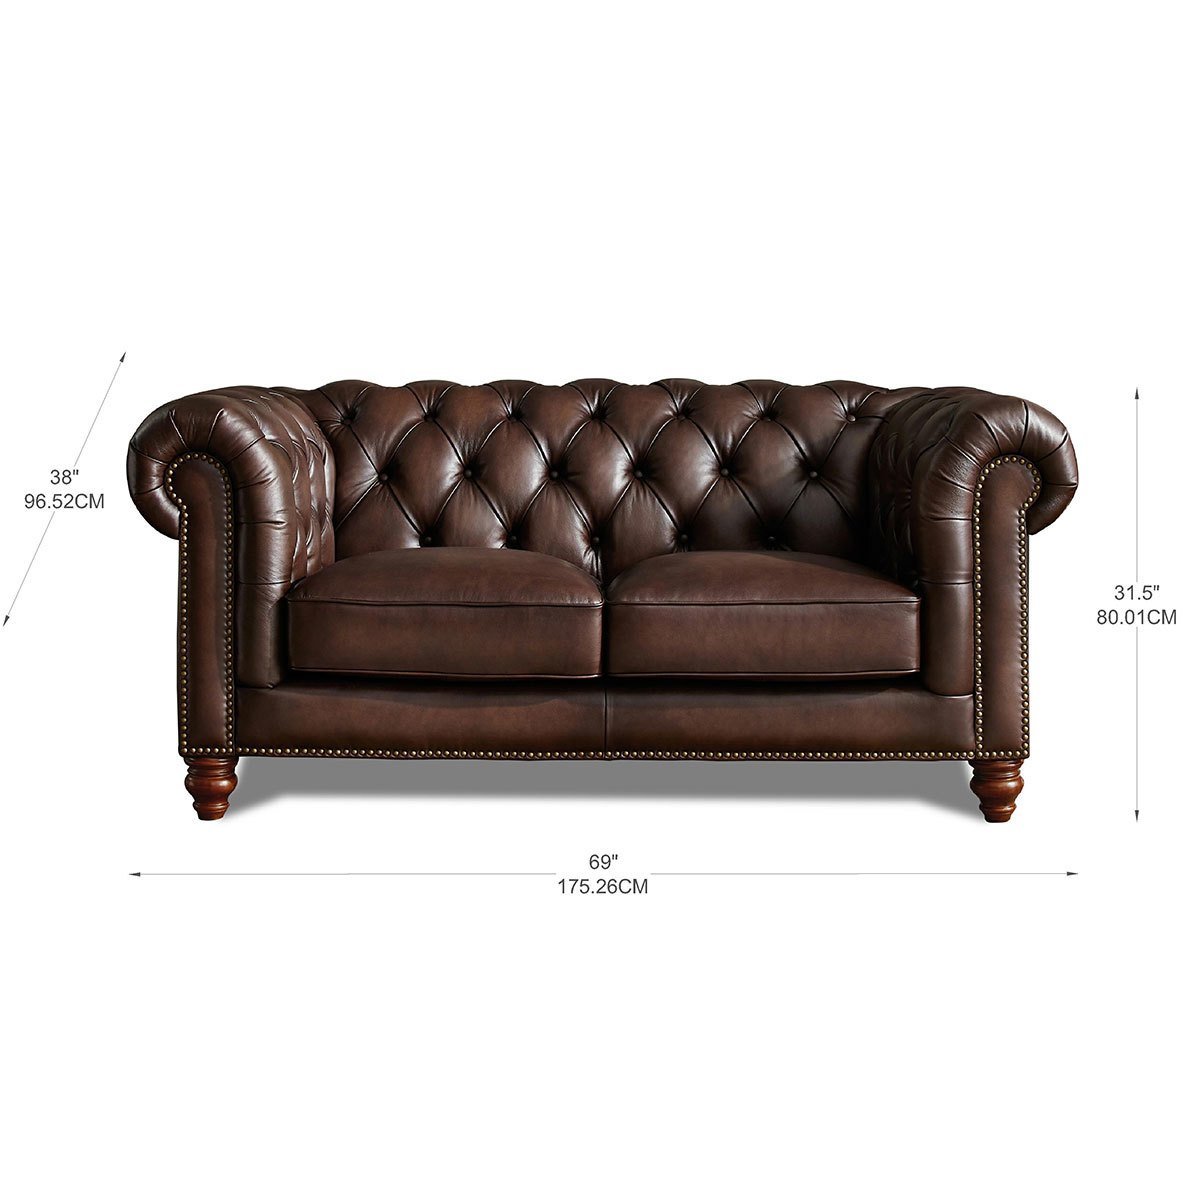 Allington 2 Seater Brown Leather Chesterfield Sofa - Signature Retail Stores